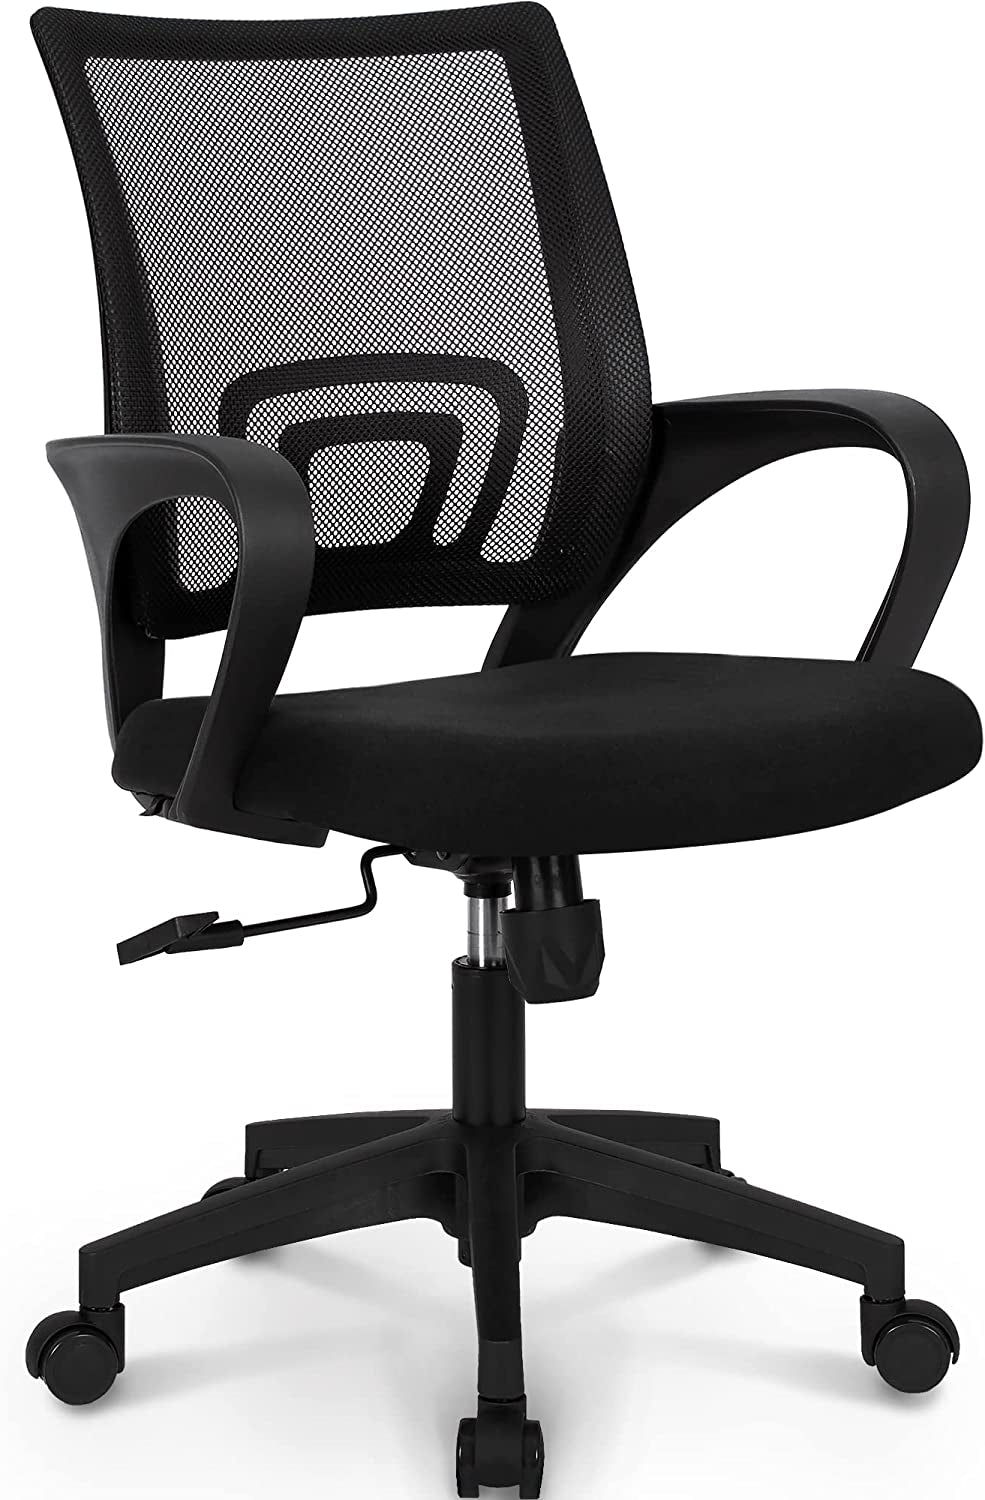 Office Computer Desk Chair Gaming-Ergonomic Mid Back Cushion Lumbar Support with Wheels Comfortable Blue Mesh Racing Seat Adjustable Swivel Rolling Home Executive (Black)